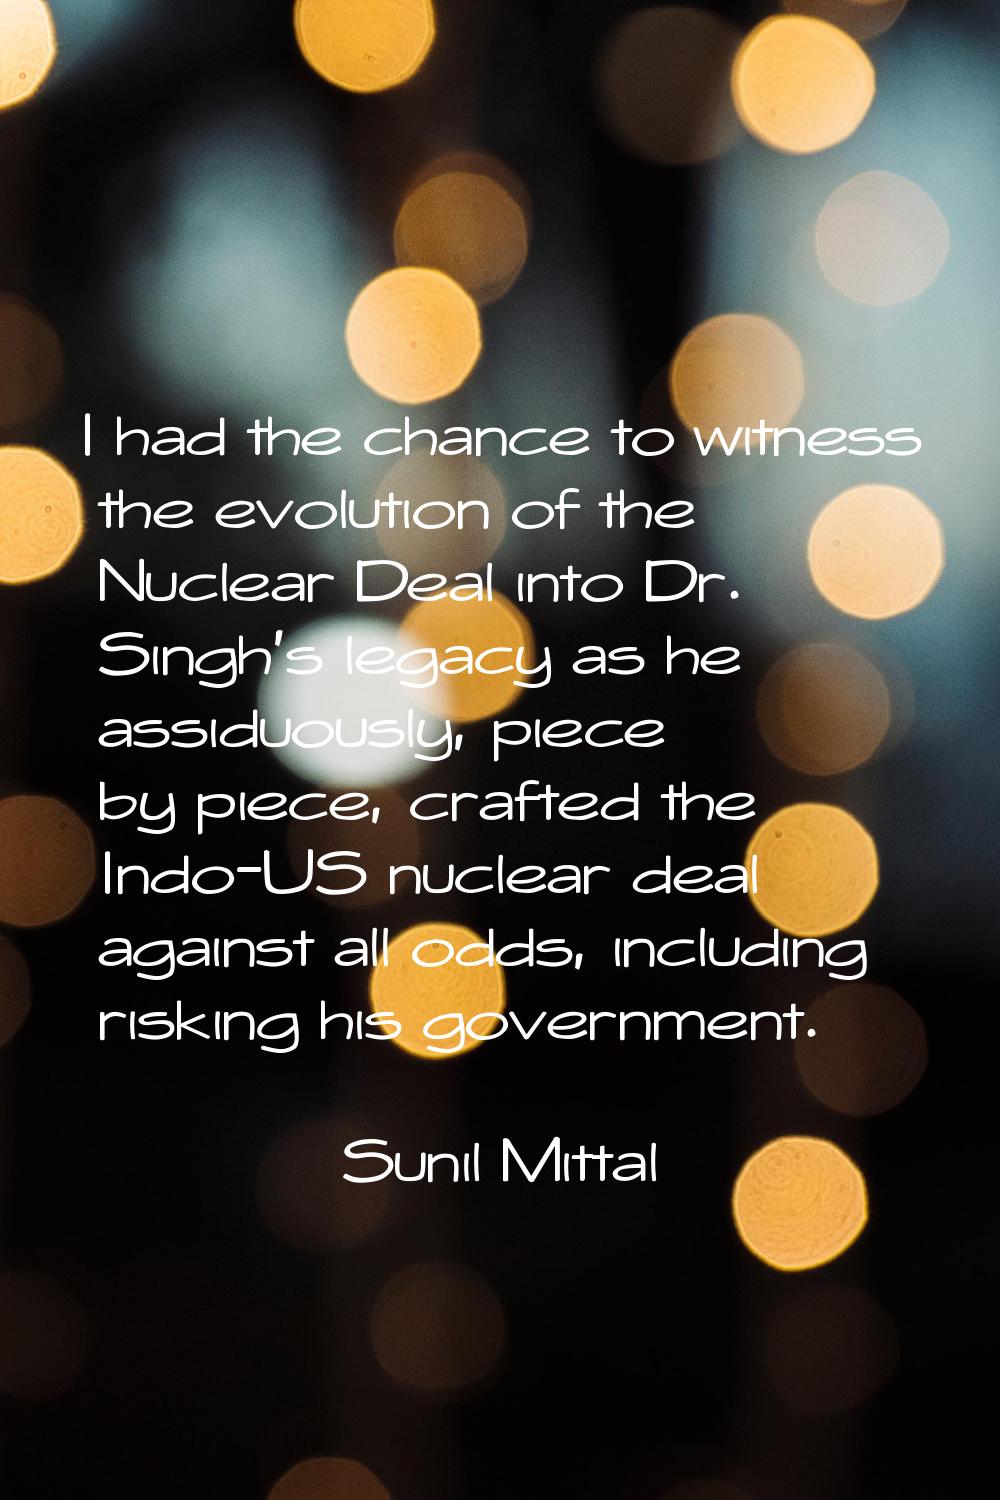 I had the chance to witness the evolution of the Nuclear Deal into Dr. Singh's legacy as he assiduo